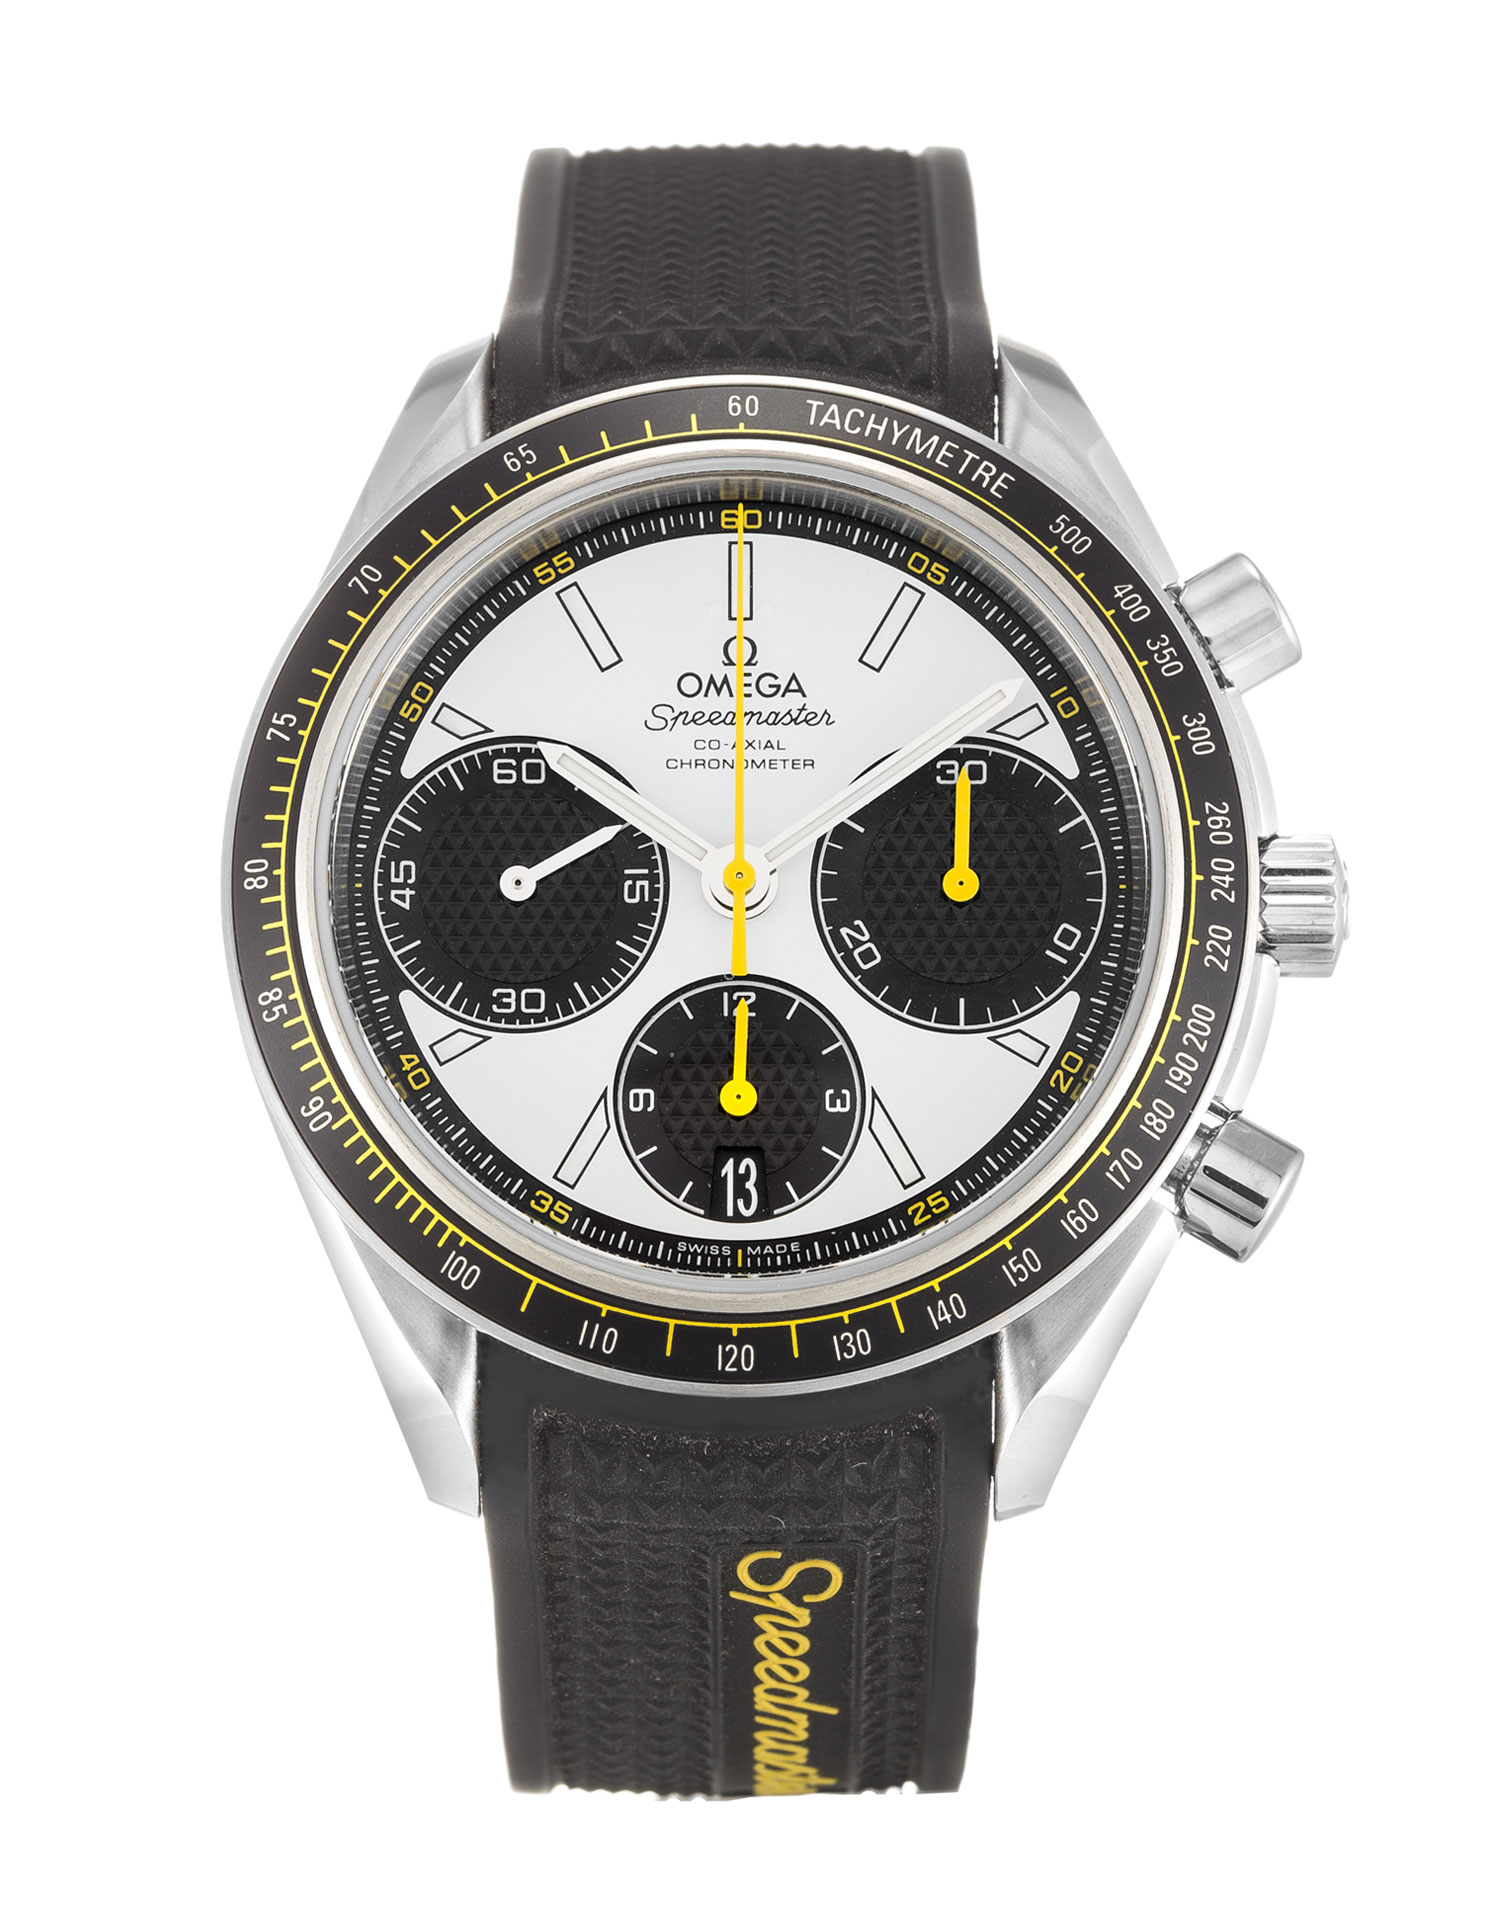 top quality replica omega with limited edition “speedy tuesday” model – $29 Replica Watches ...